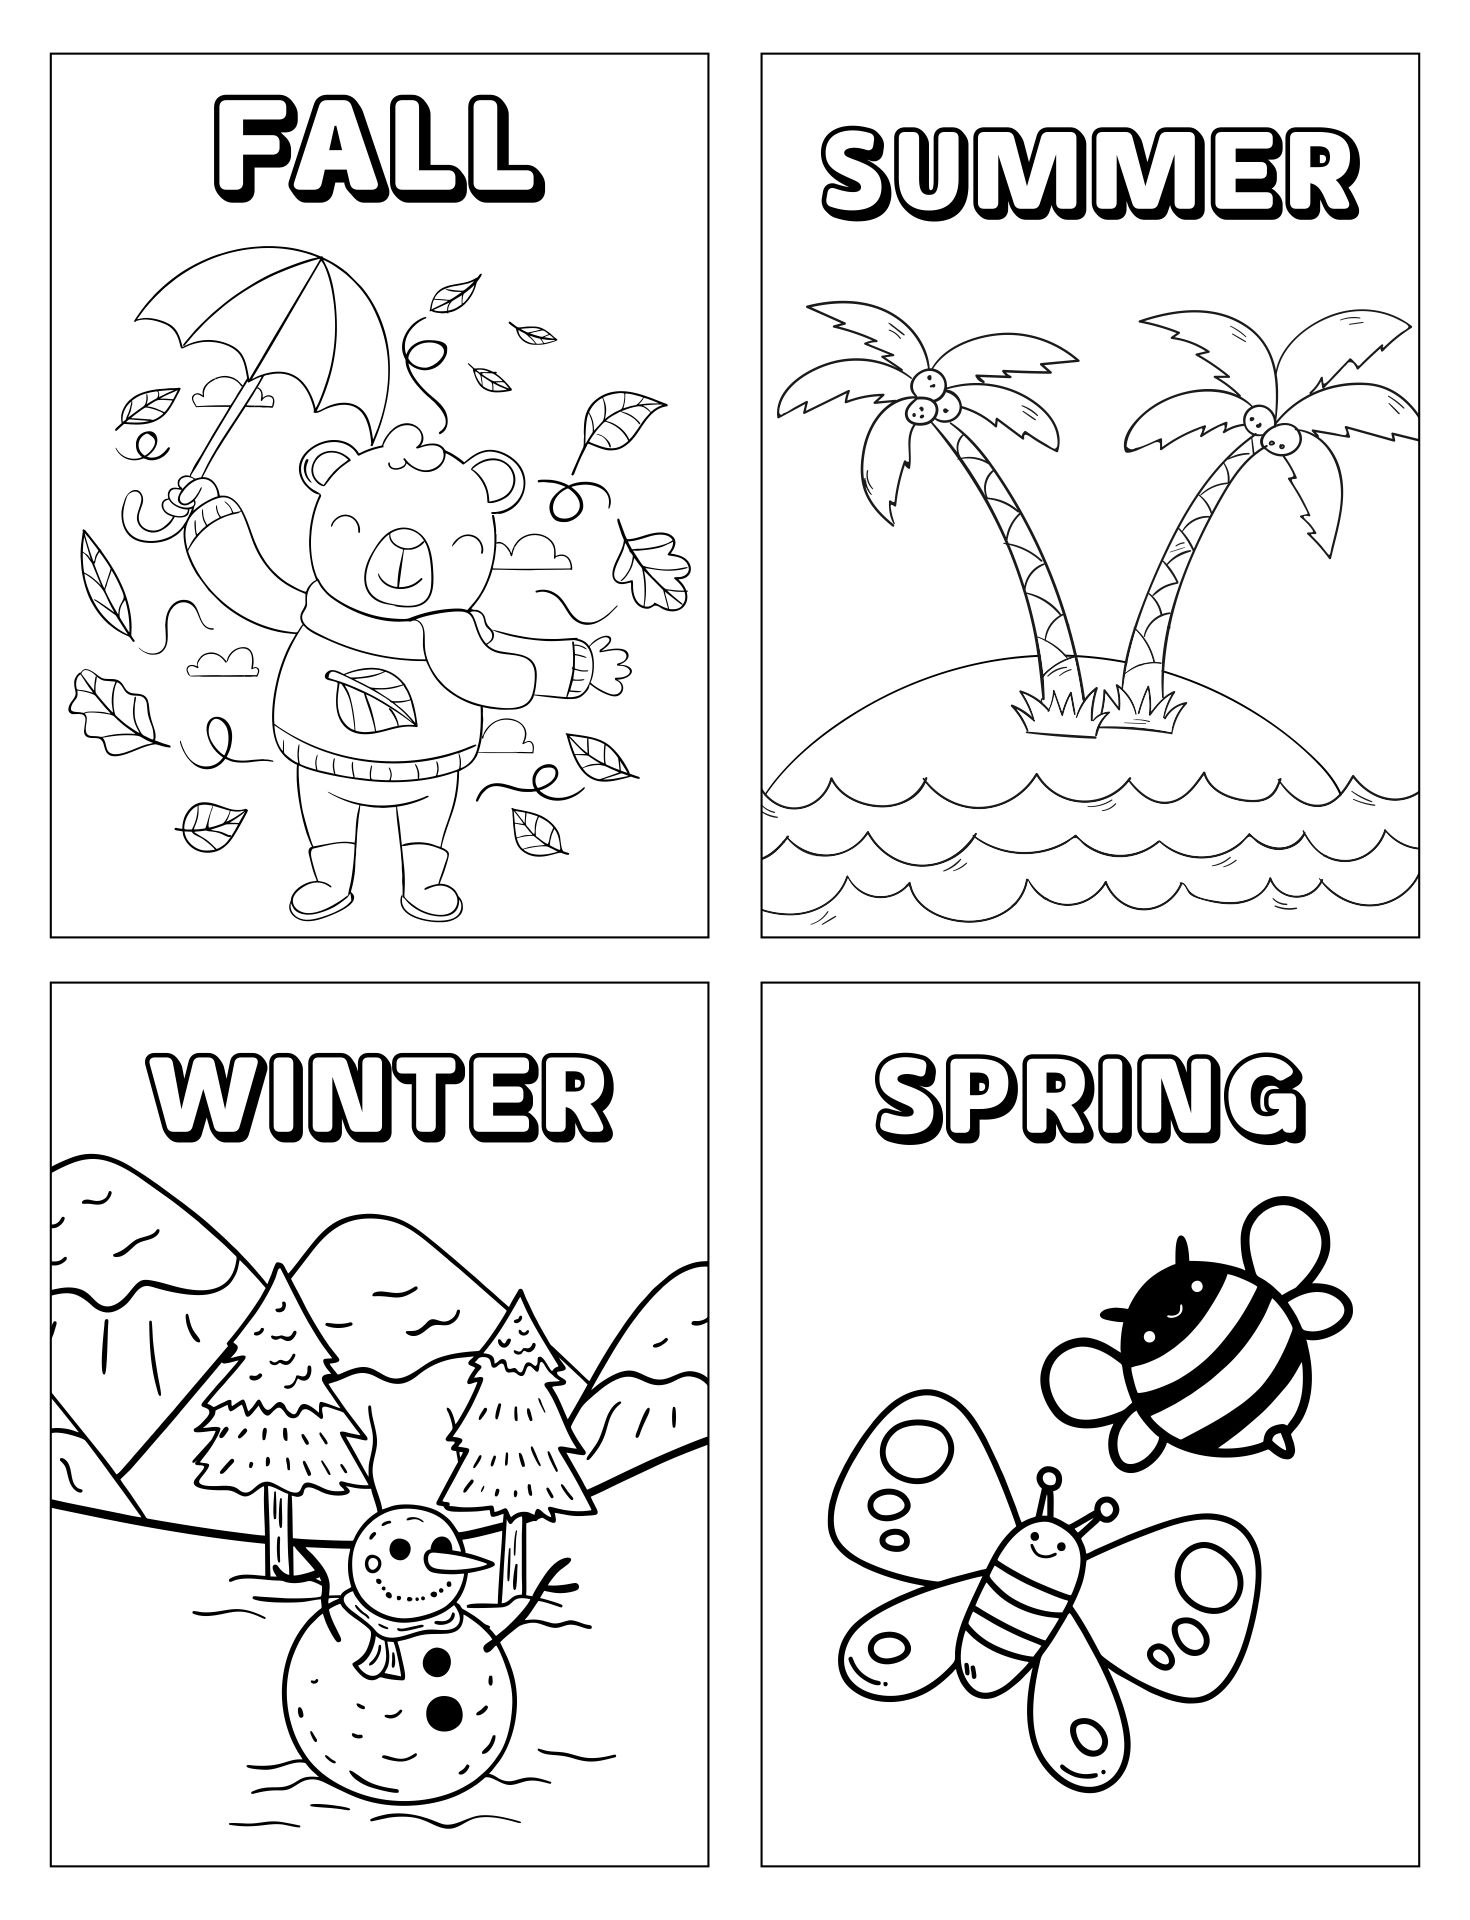 4 Seasons Coloring Pages